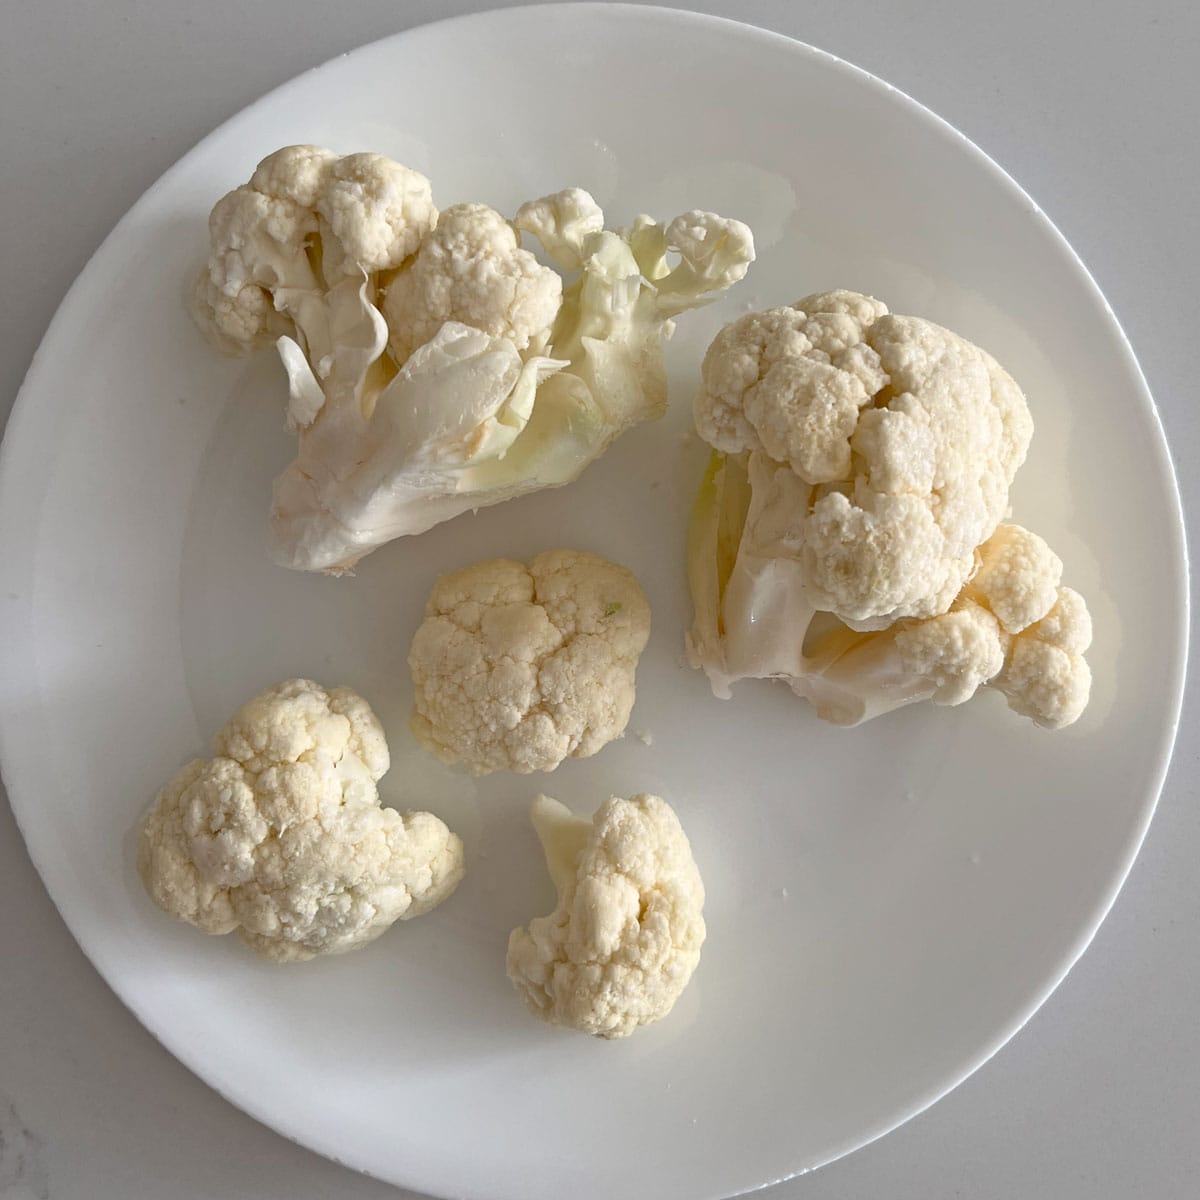 Bagged cauliflower florets come in different sizes. 